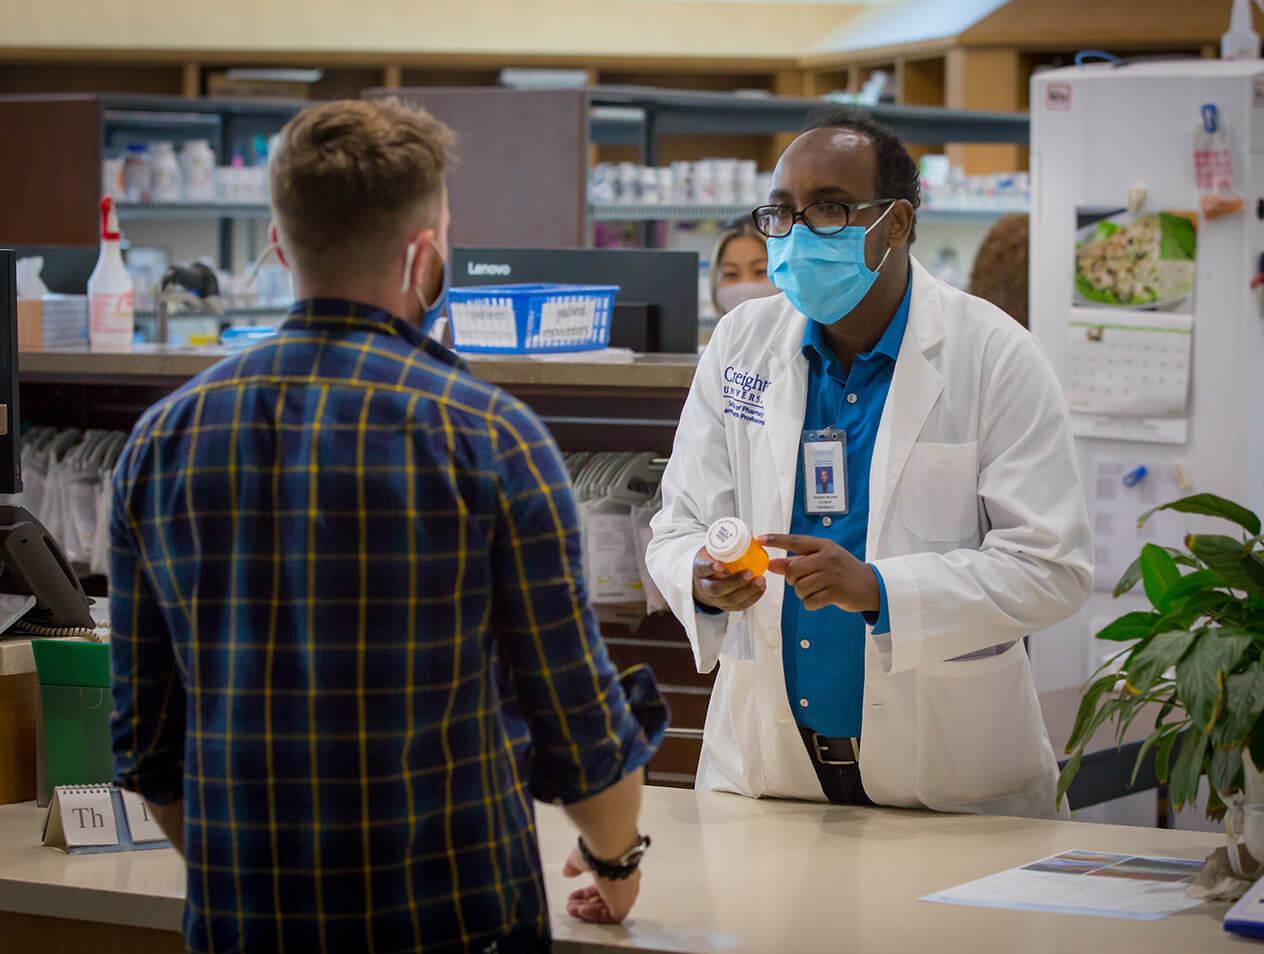 A pharmacy student explains a bottle of medication to a man